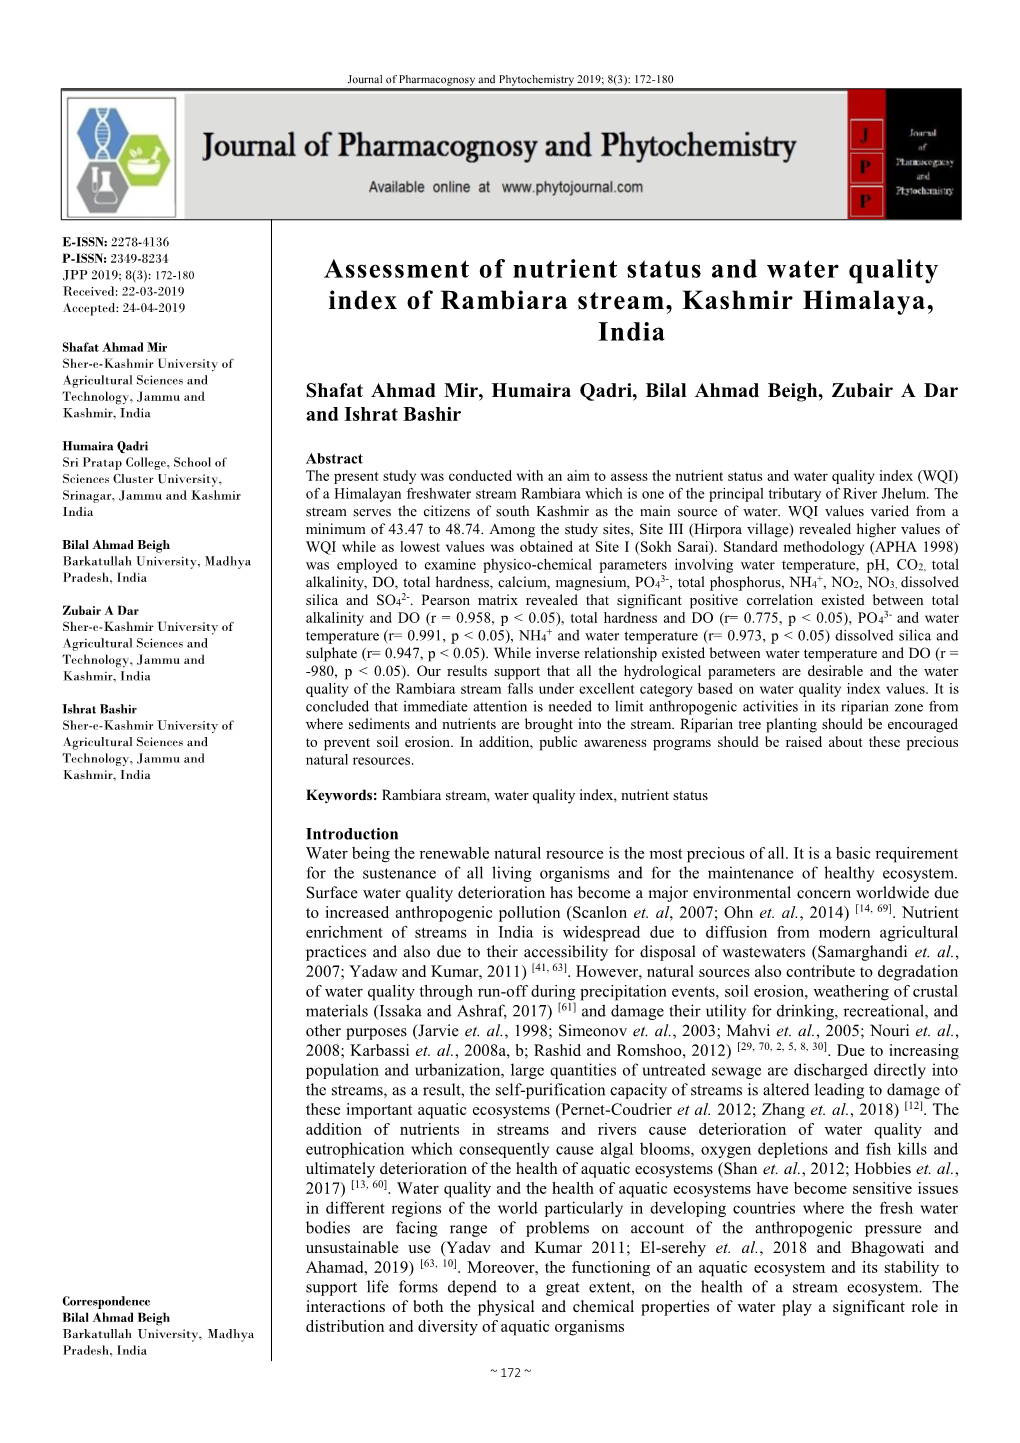 Assessment of Nutrient Status and Water Quality Index of Rambiara